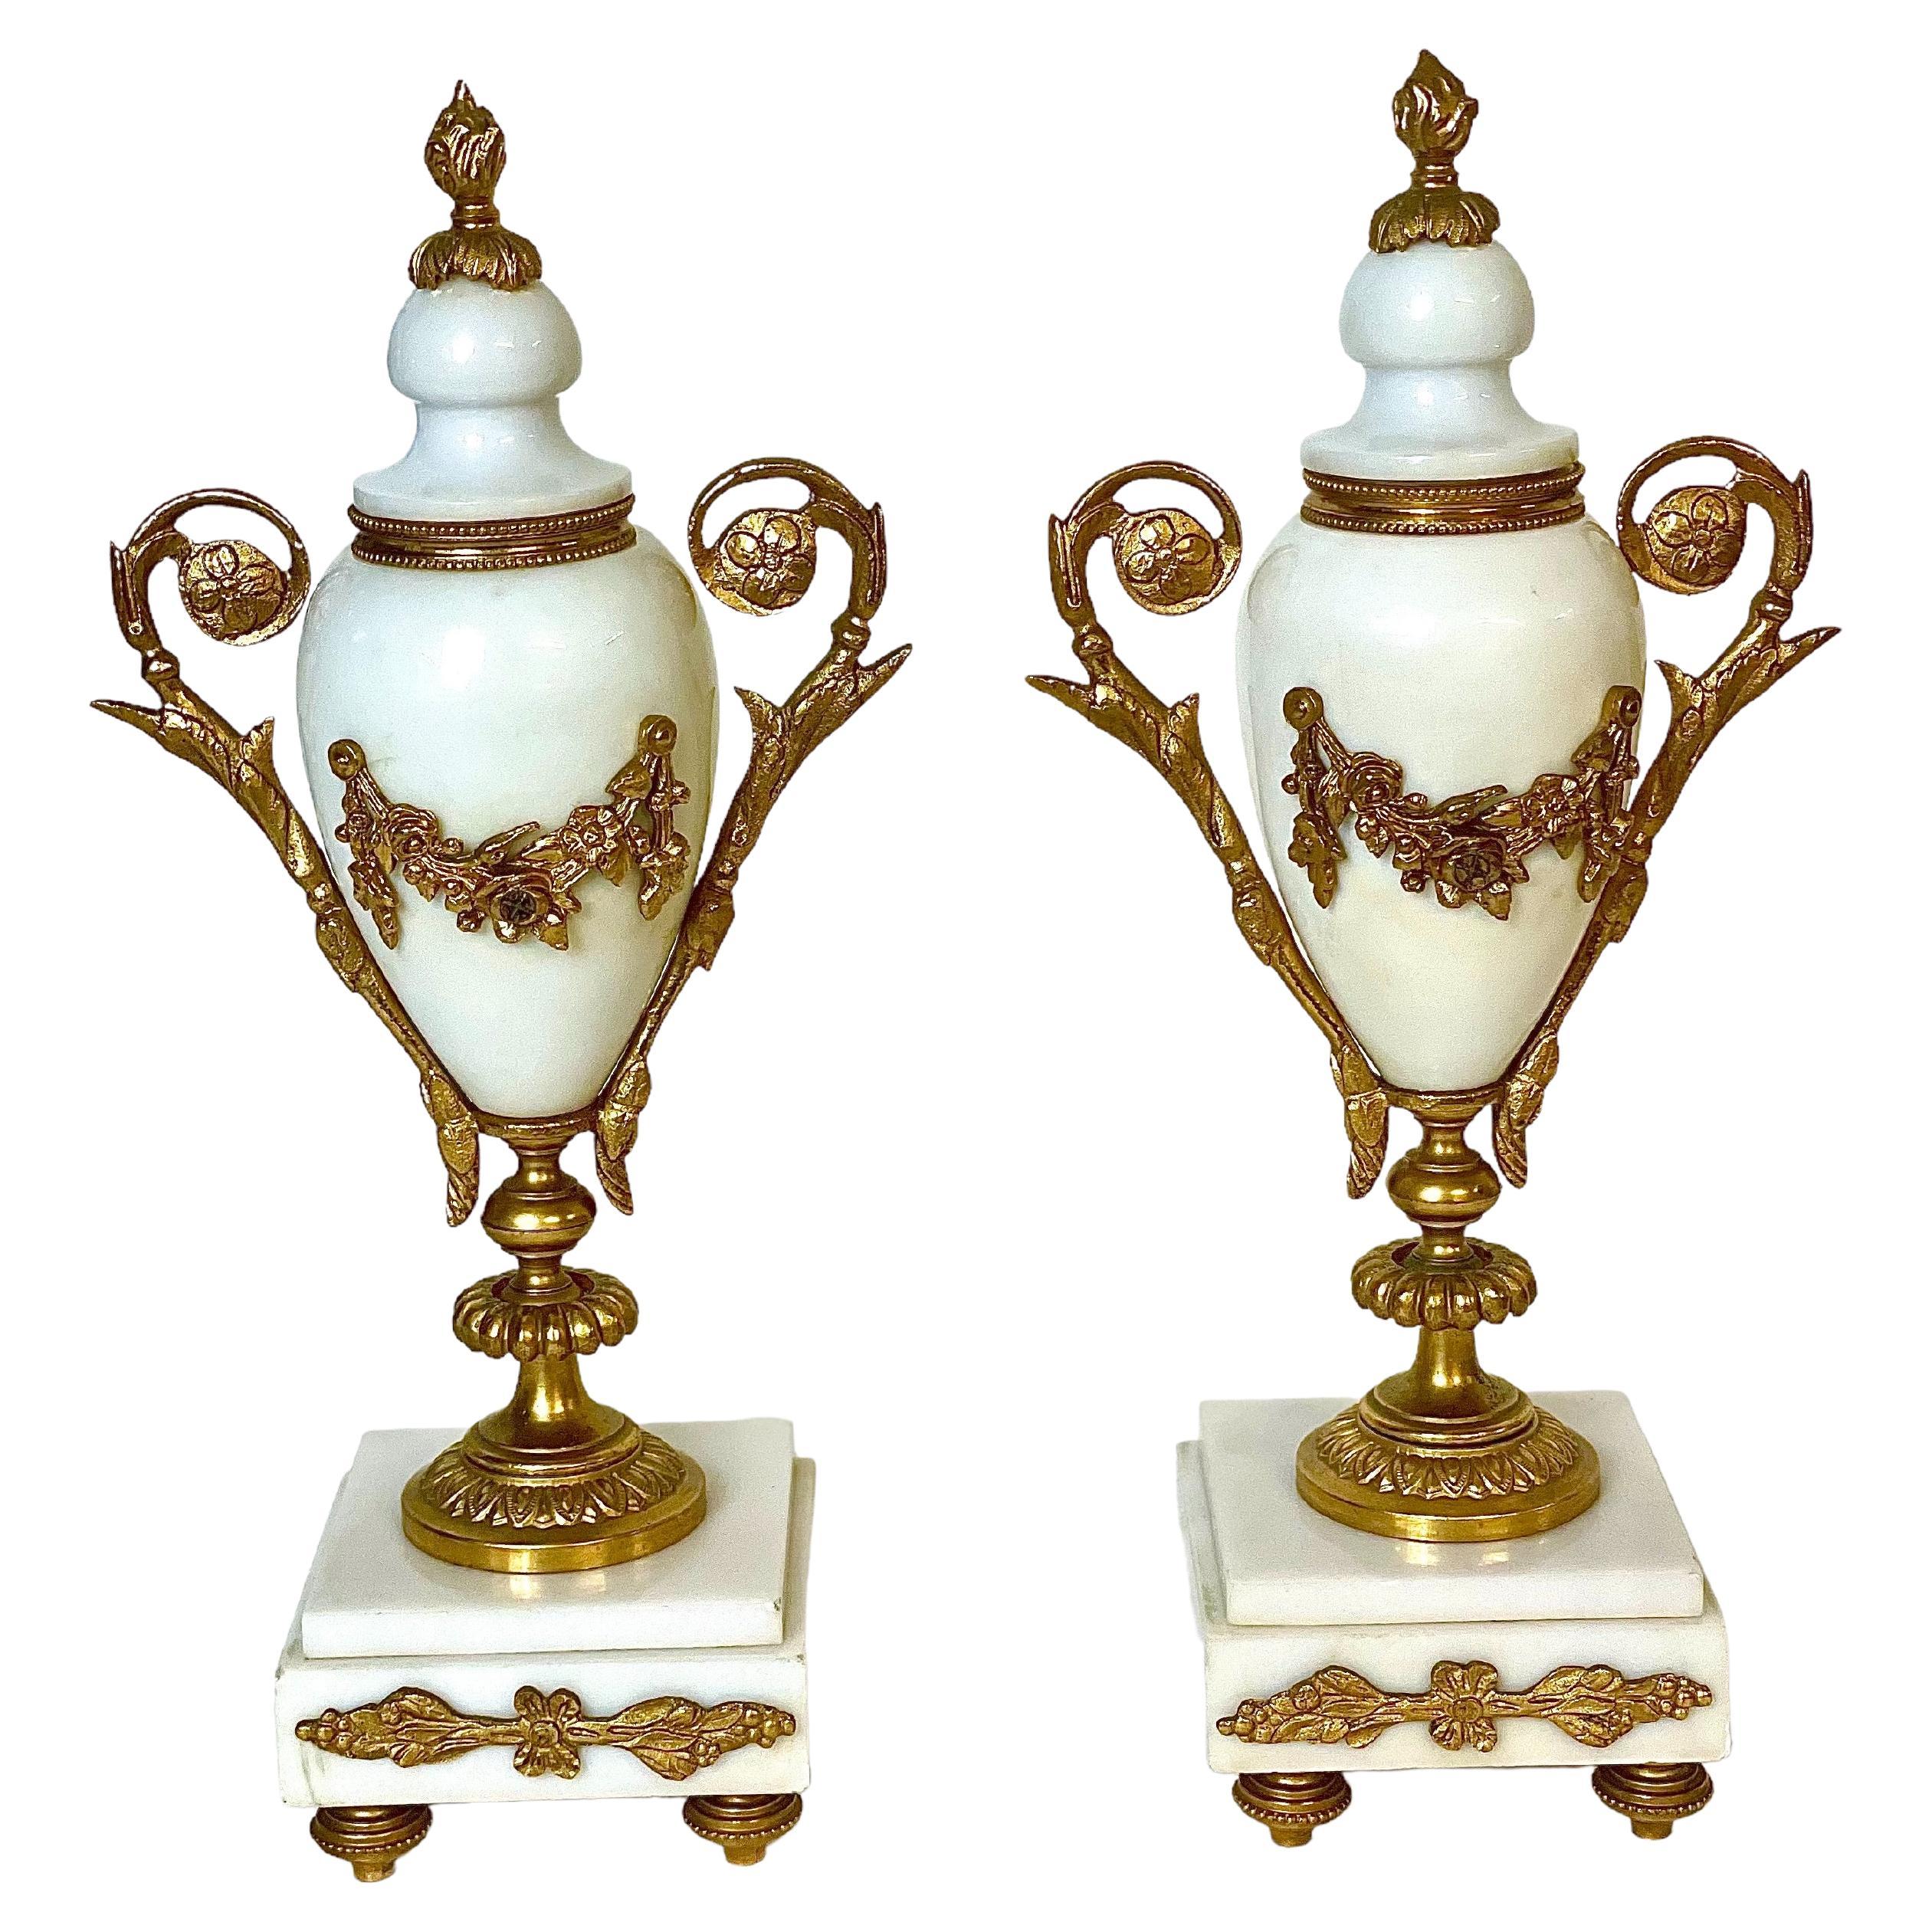 Pair of White Marble and Ormolu 'Cassolette' Urns